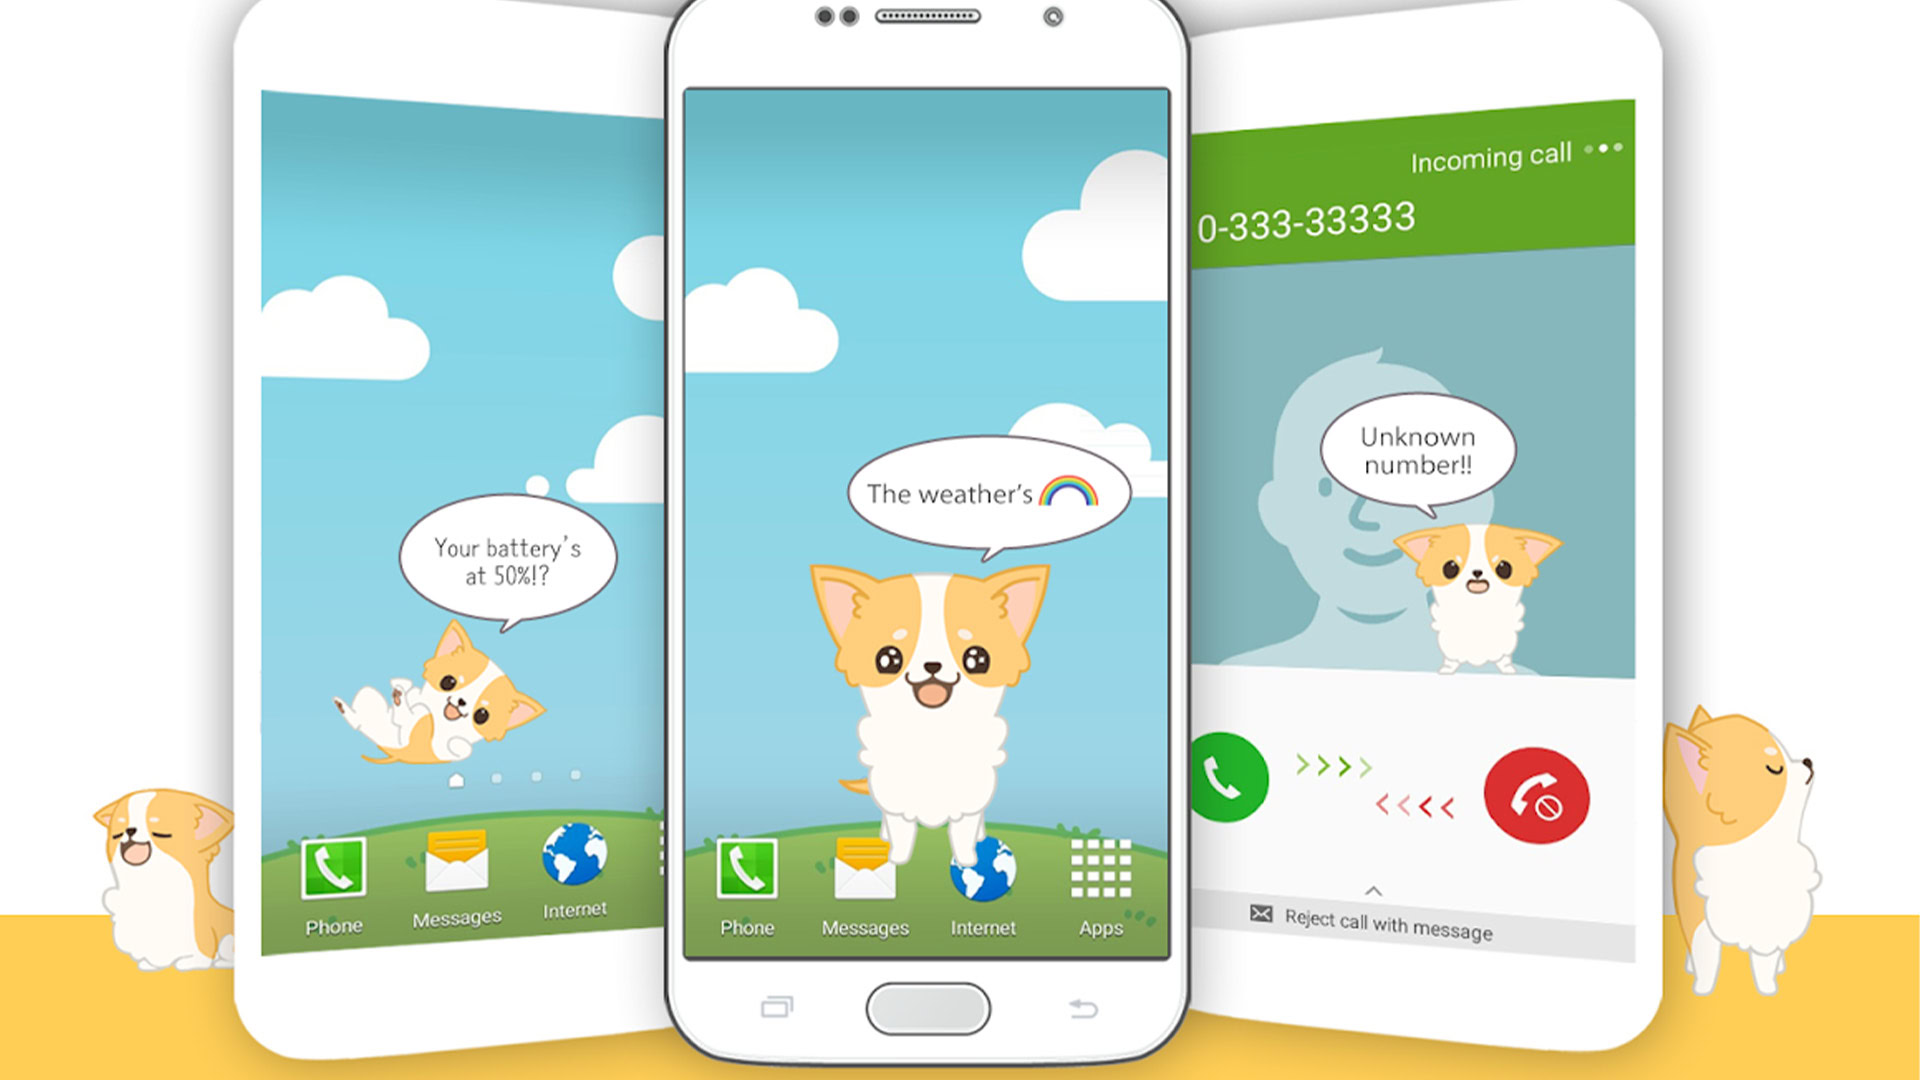 Family Pet Dog Games - Apps on Google Play